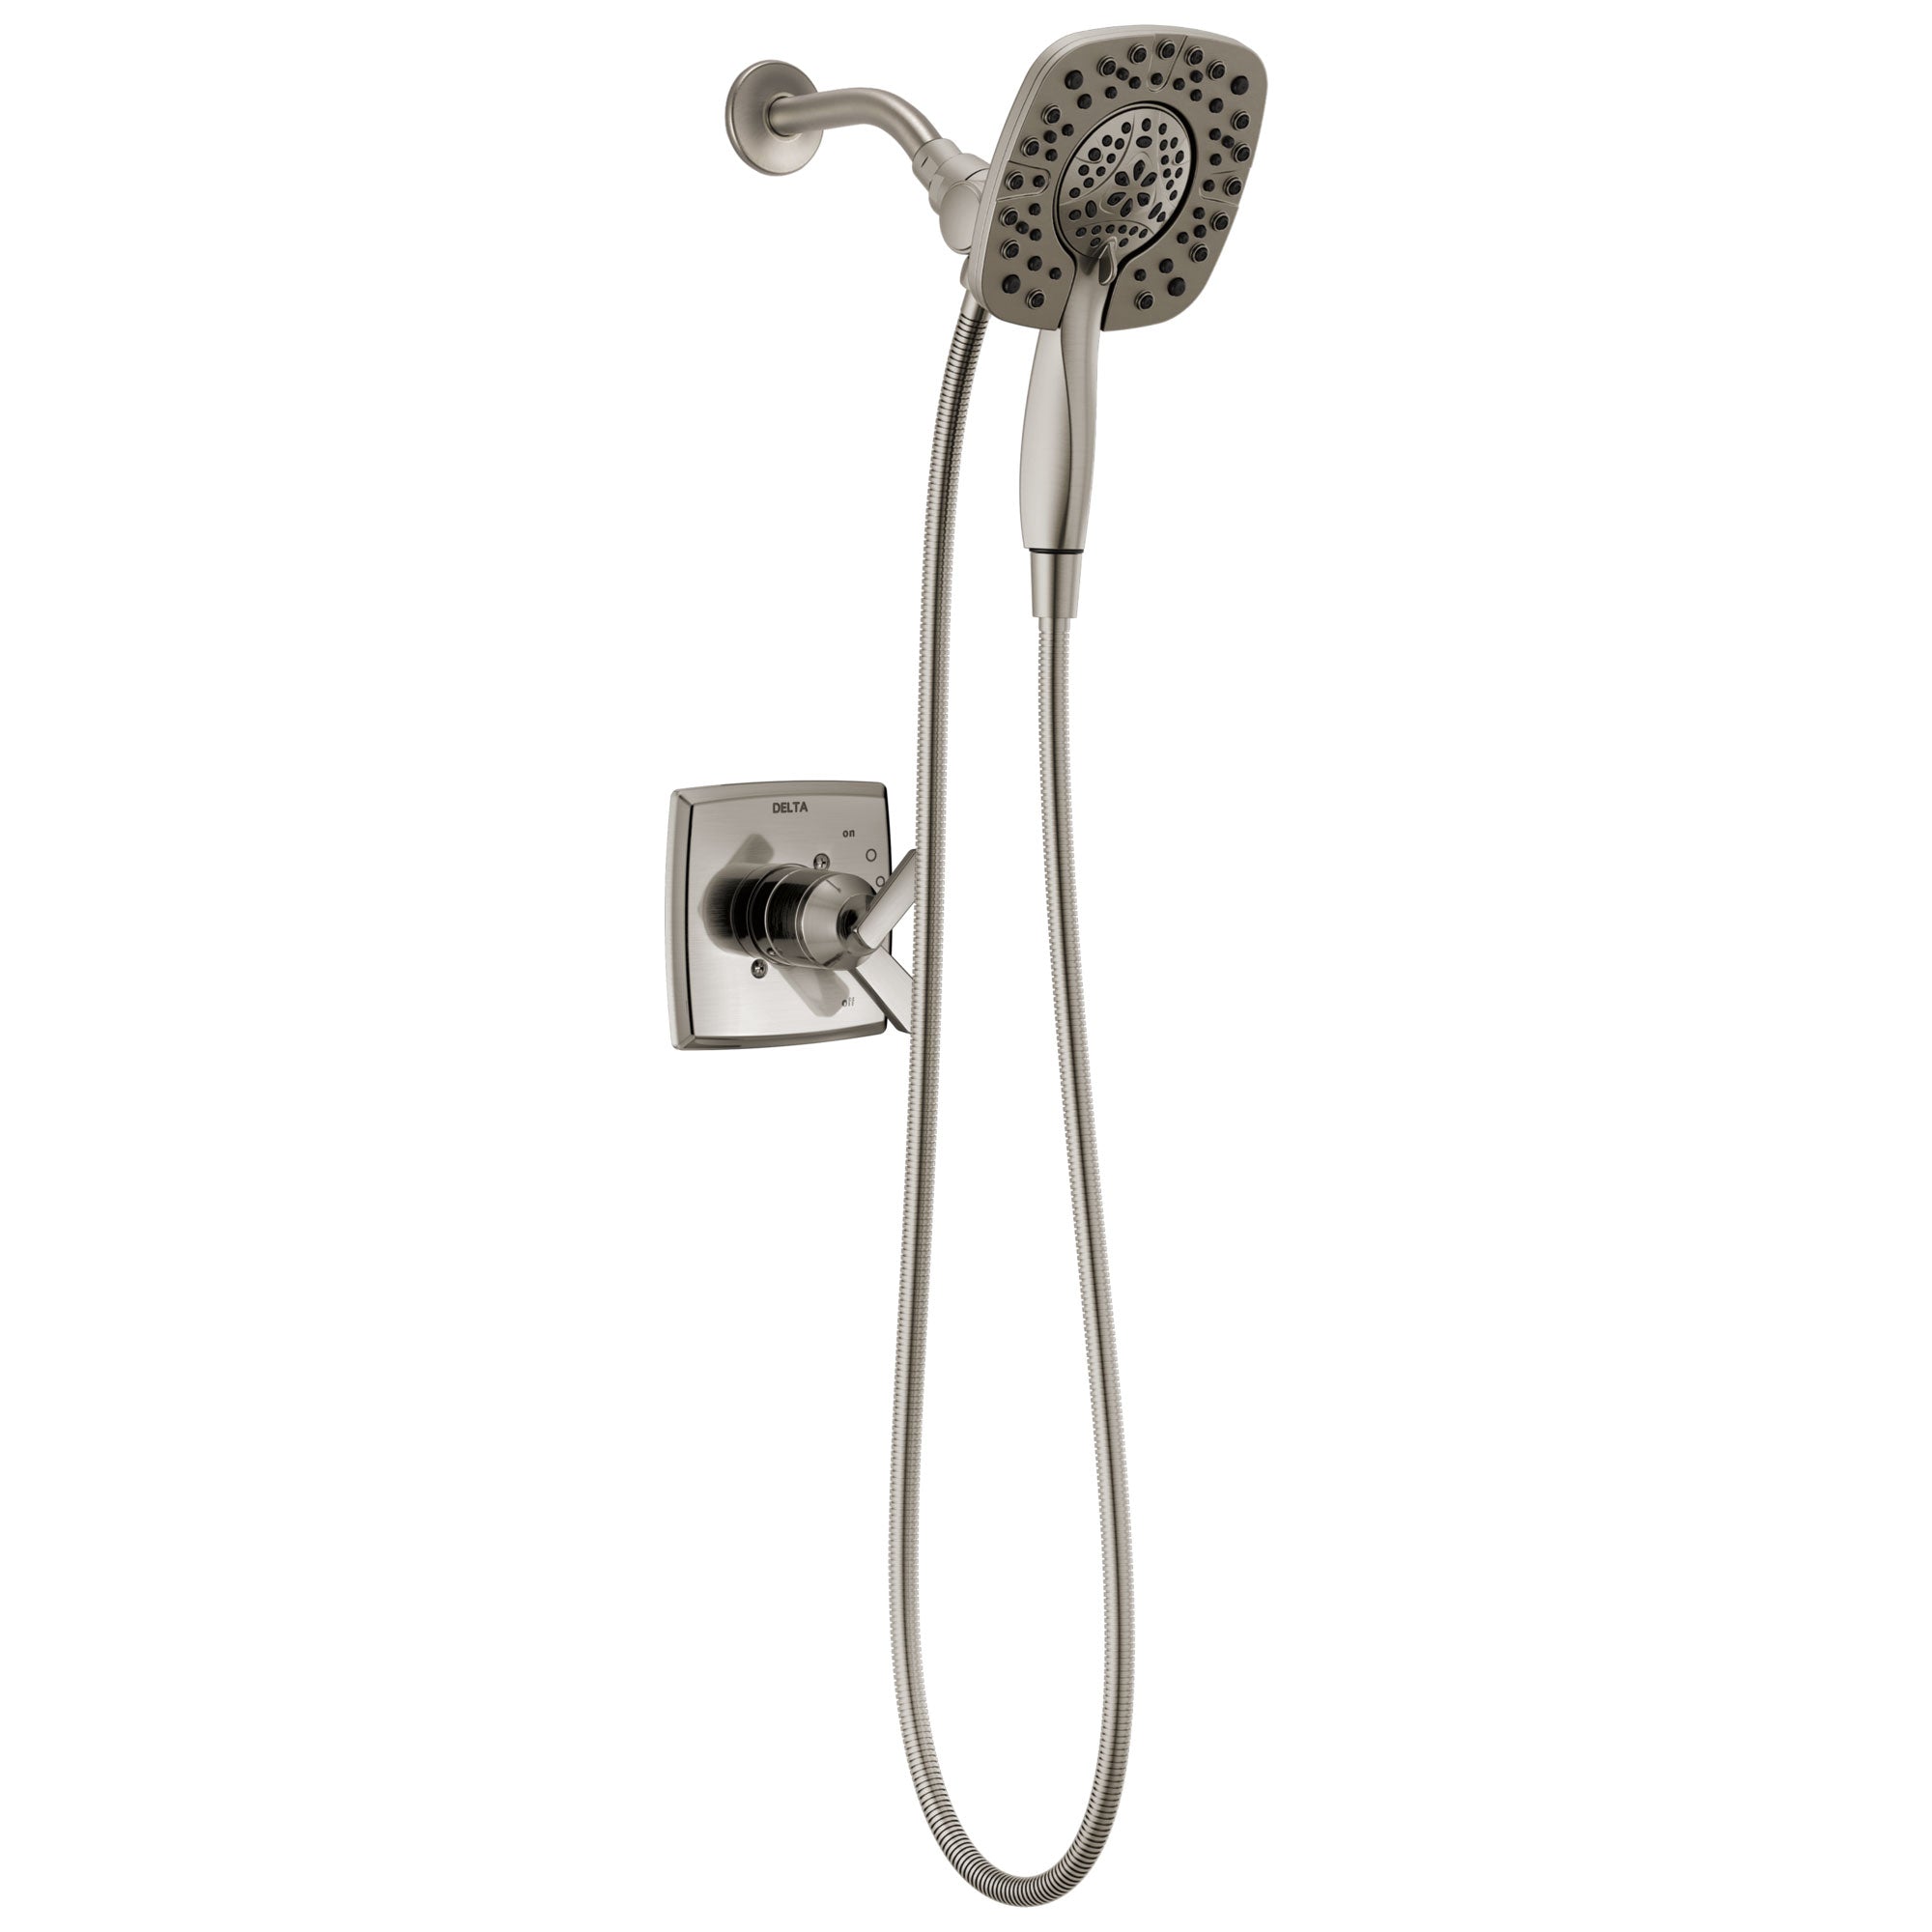 Delta Ashlyn In2ition 1-Handle Shower Faucet Trim Kit in Stainless Steel Finish (Valve Not Included) 685389